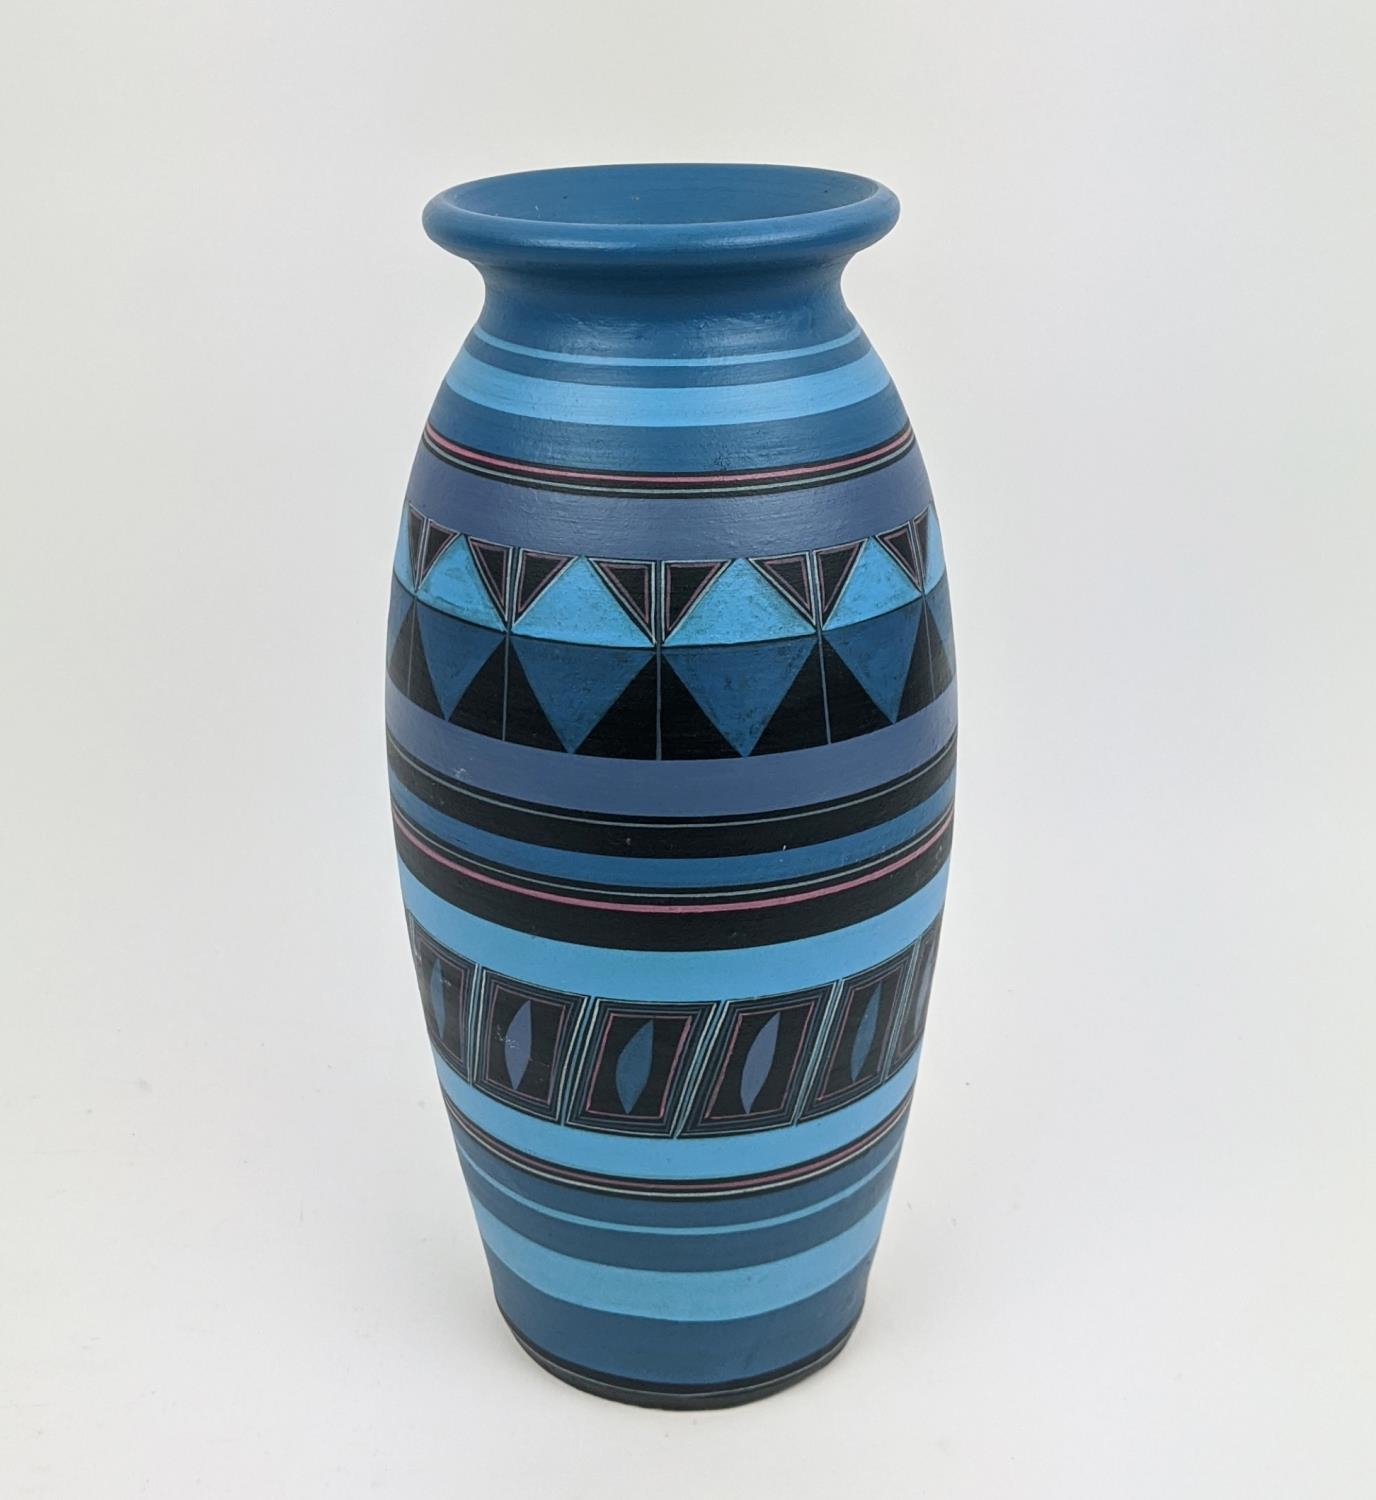 A PORTUGESE STUDIO POTTERY VASE, late 20th Century, hand painted in a geometric design, terracotta - Image 2 of 7